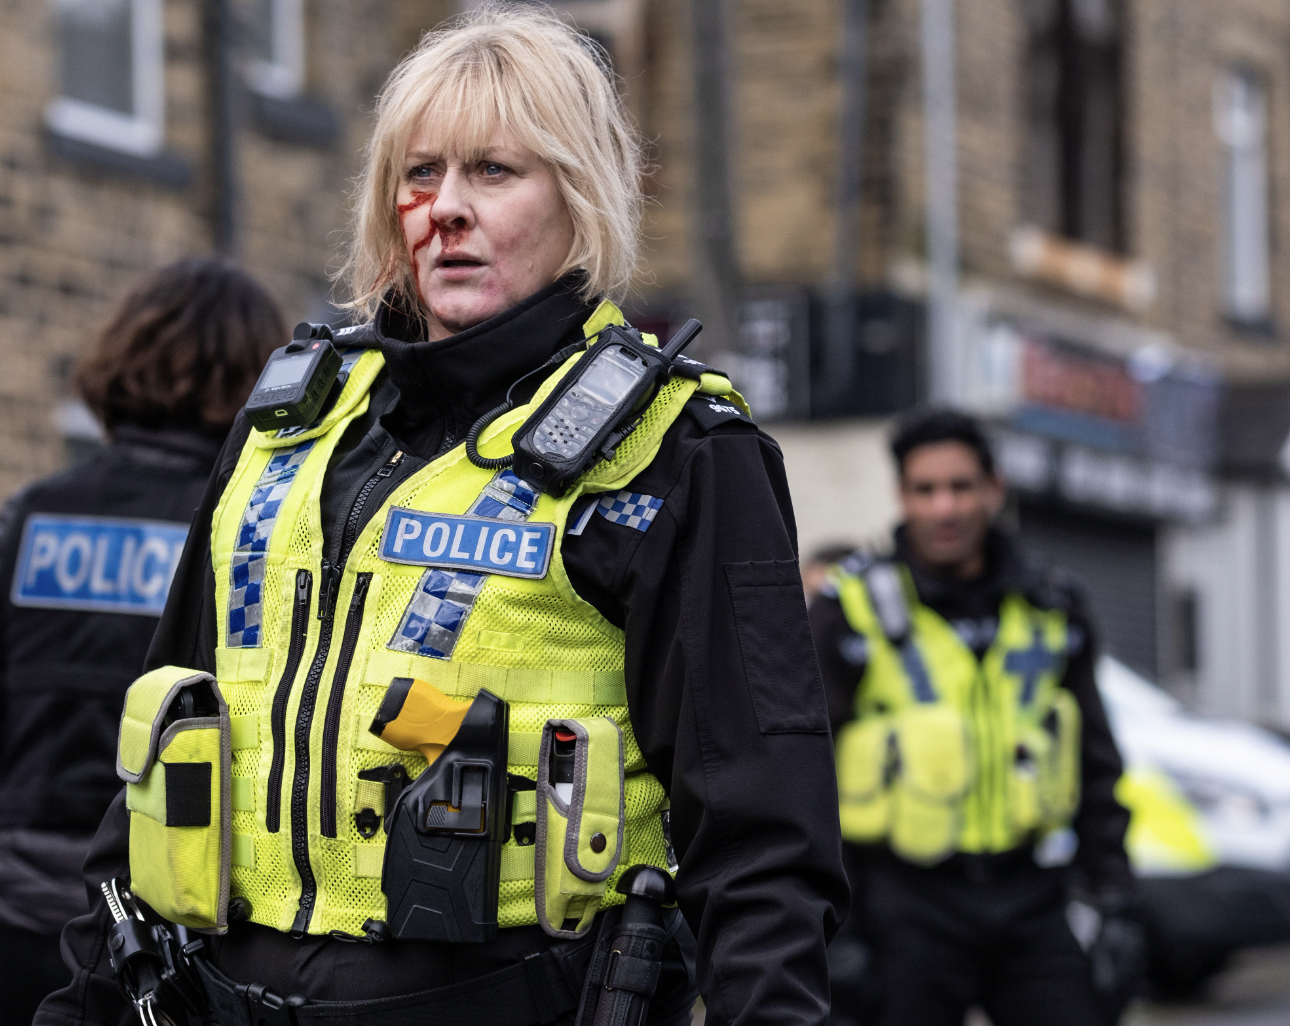 First look Halifax premiere for final series of the BBC’s Happy Valley